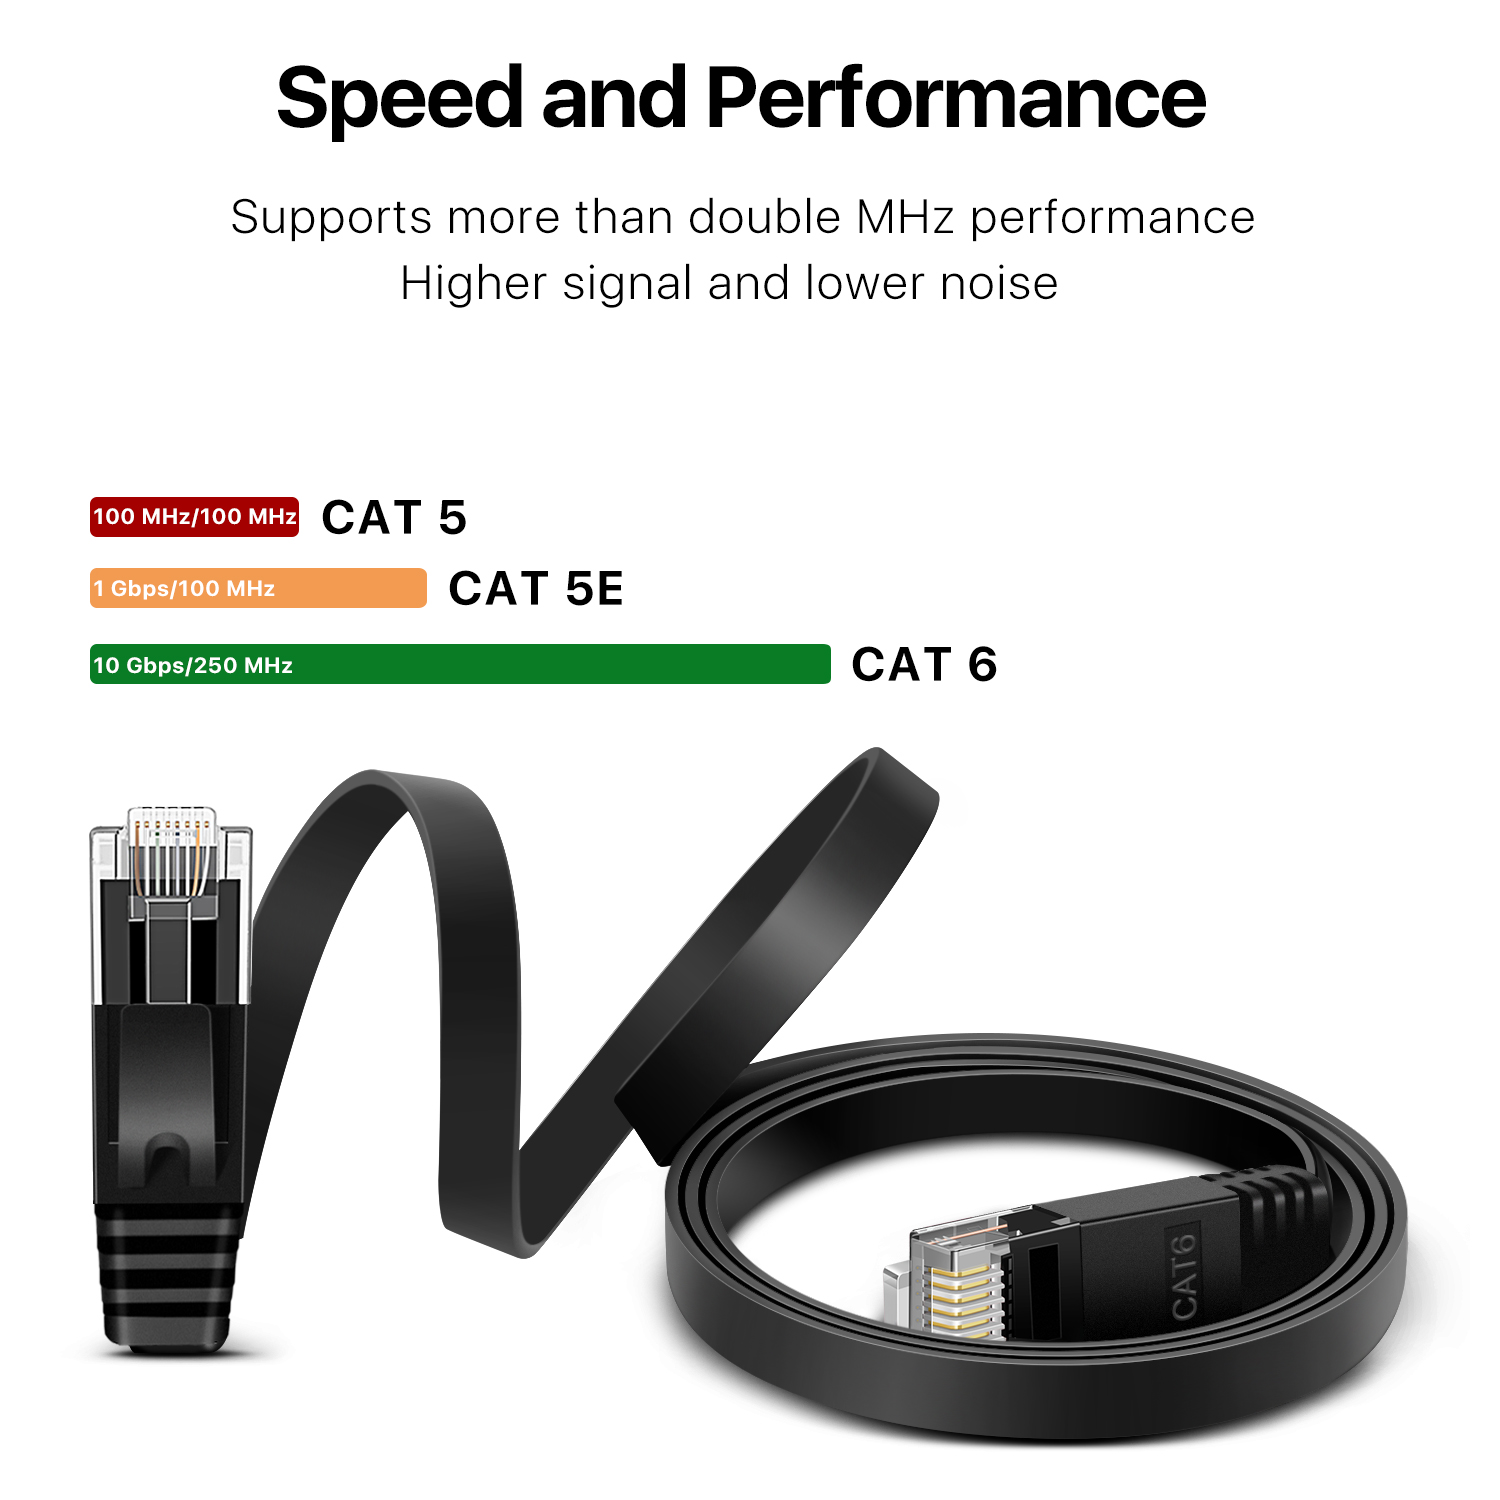 Ultra Slim and Flat to improve the look of your home or office; With just 0.05 inch thin, the flat cable makes it easy to fit between spaces,which are perfect camouflage underneath carpets, walls, or even behind furniture